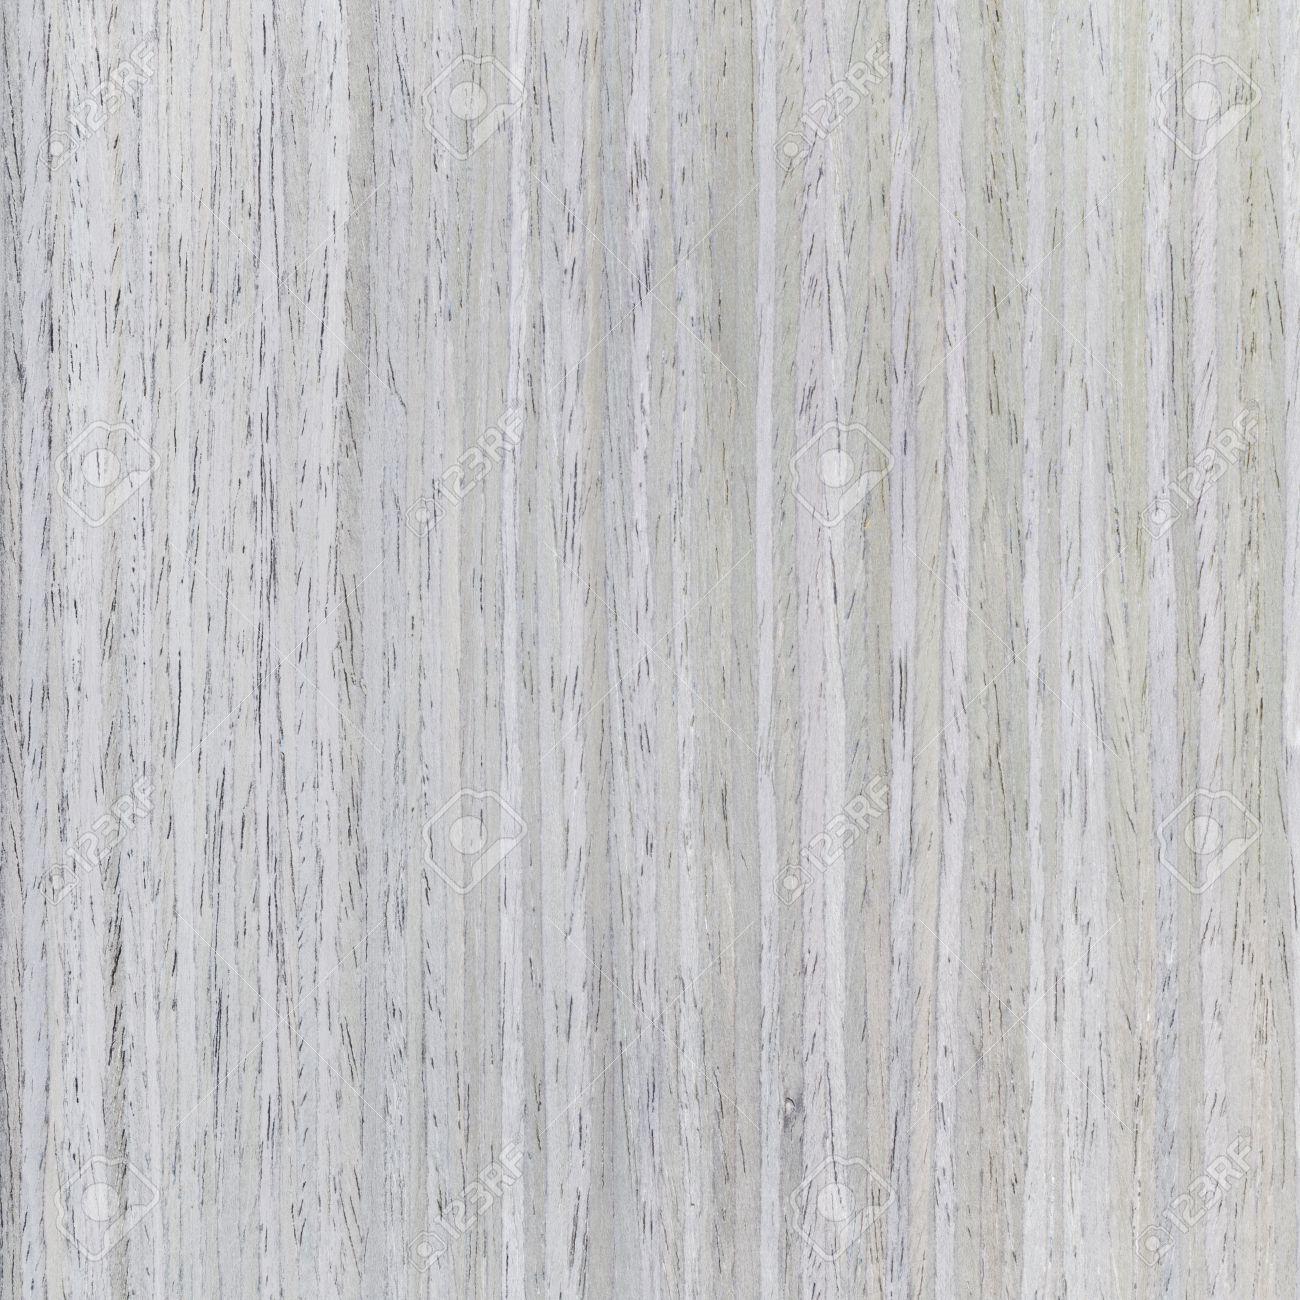 Grey Oak Background Of Wood Grain Stock Photo Picture And Royalty